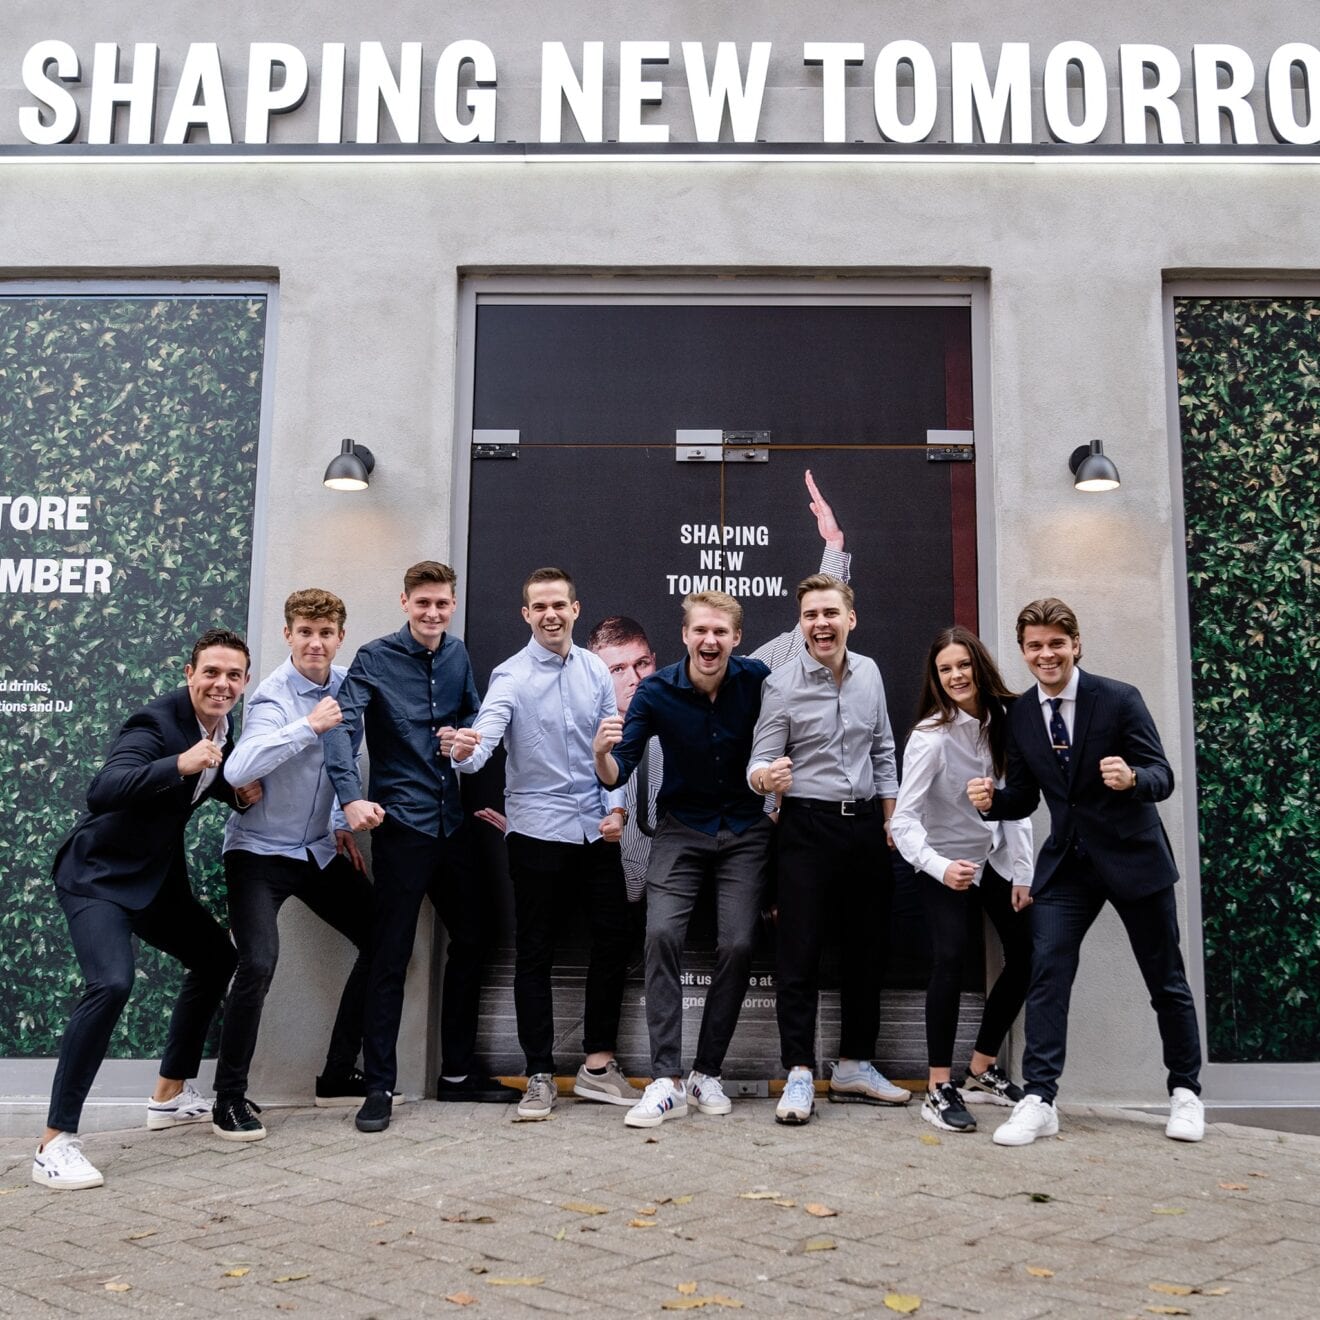 Shaping New Tomorrow i Odense spreder Black Friday ud over en uge for at minimere smitterisiko